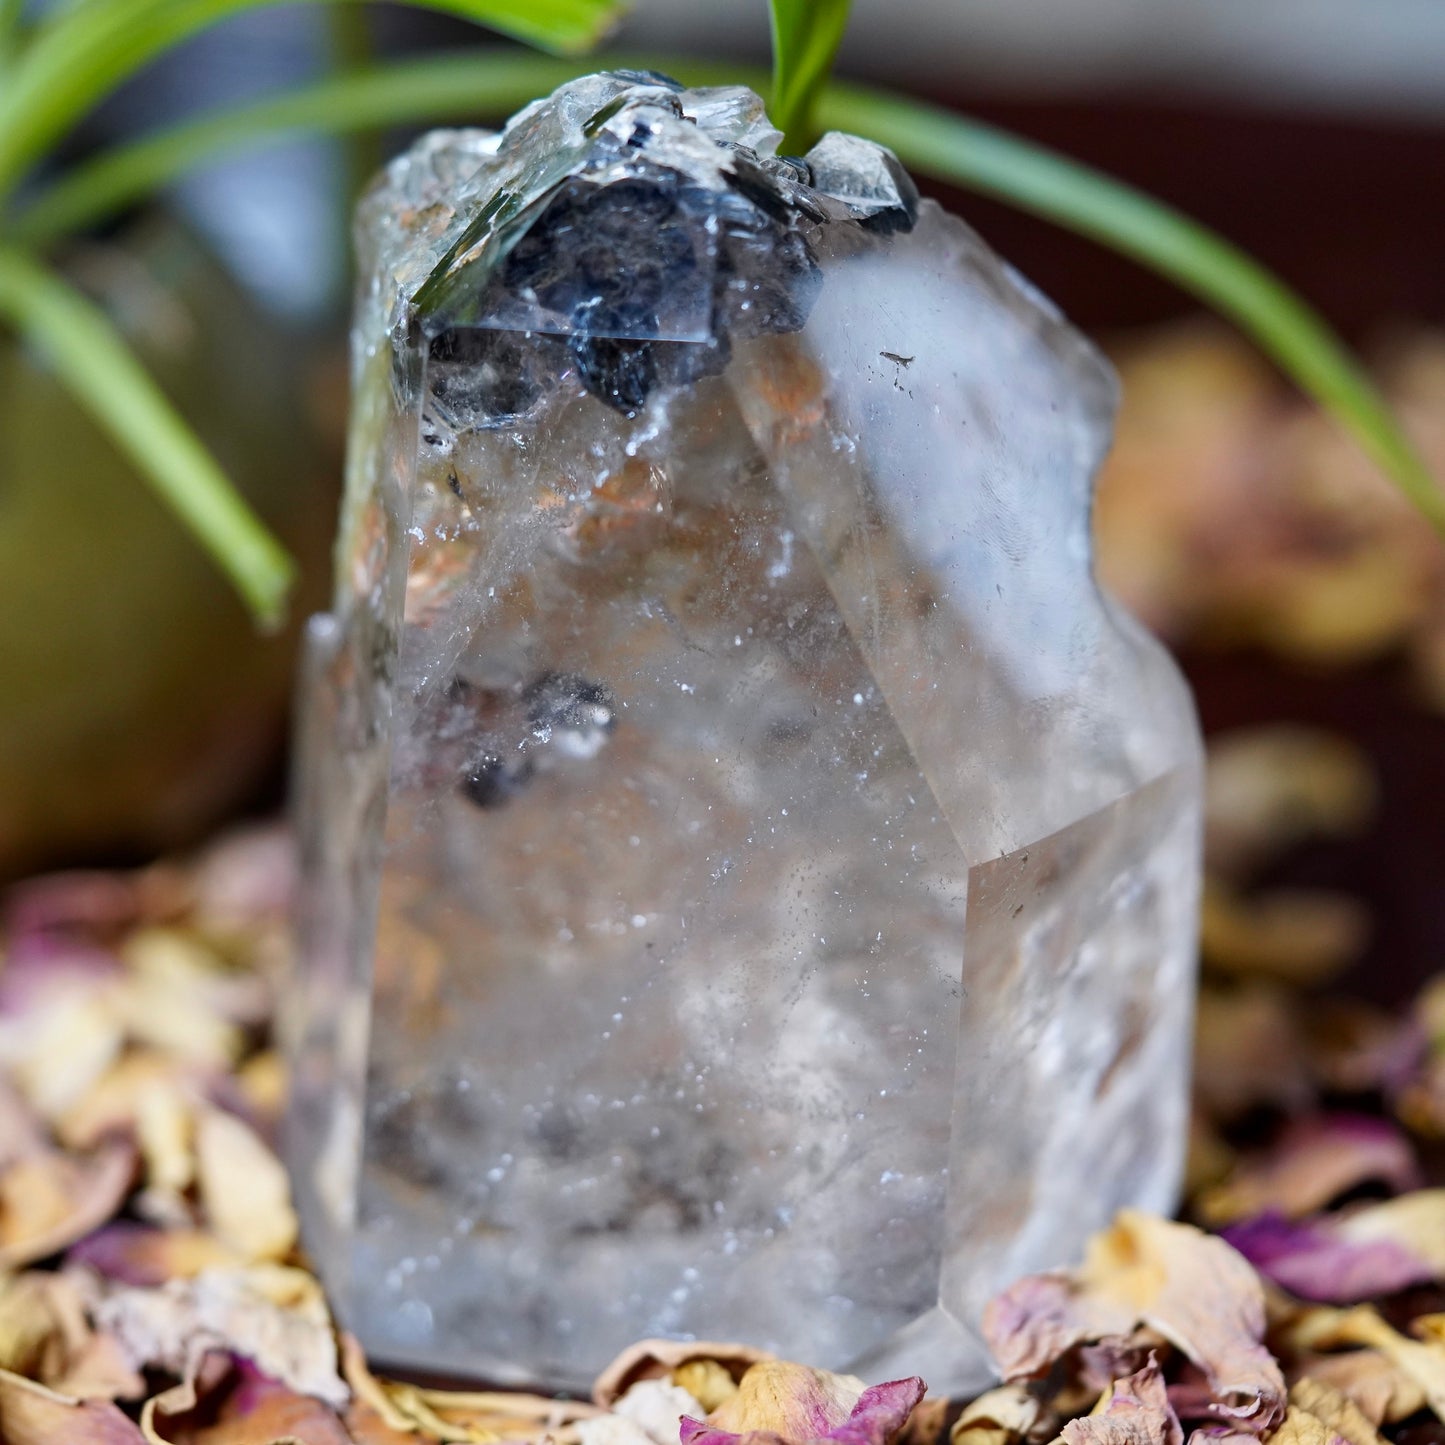 Chunky Clear Quartz tower with black Biotite Mica crystals on tip with dried roses and green plant in background